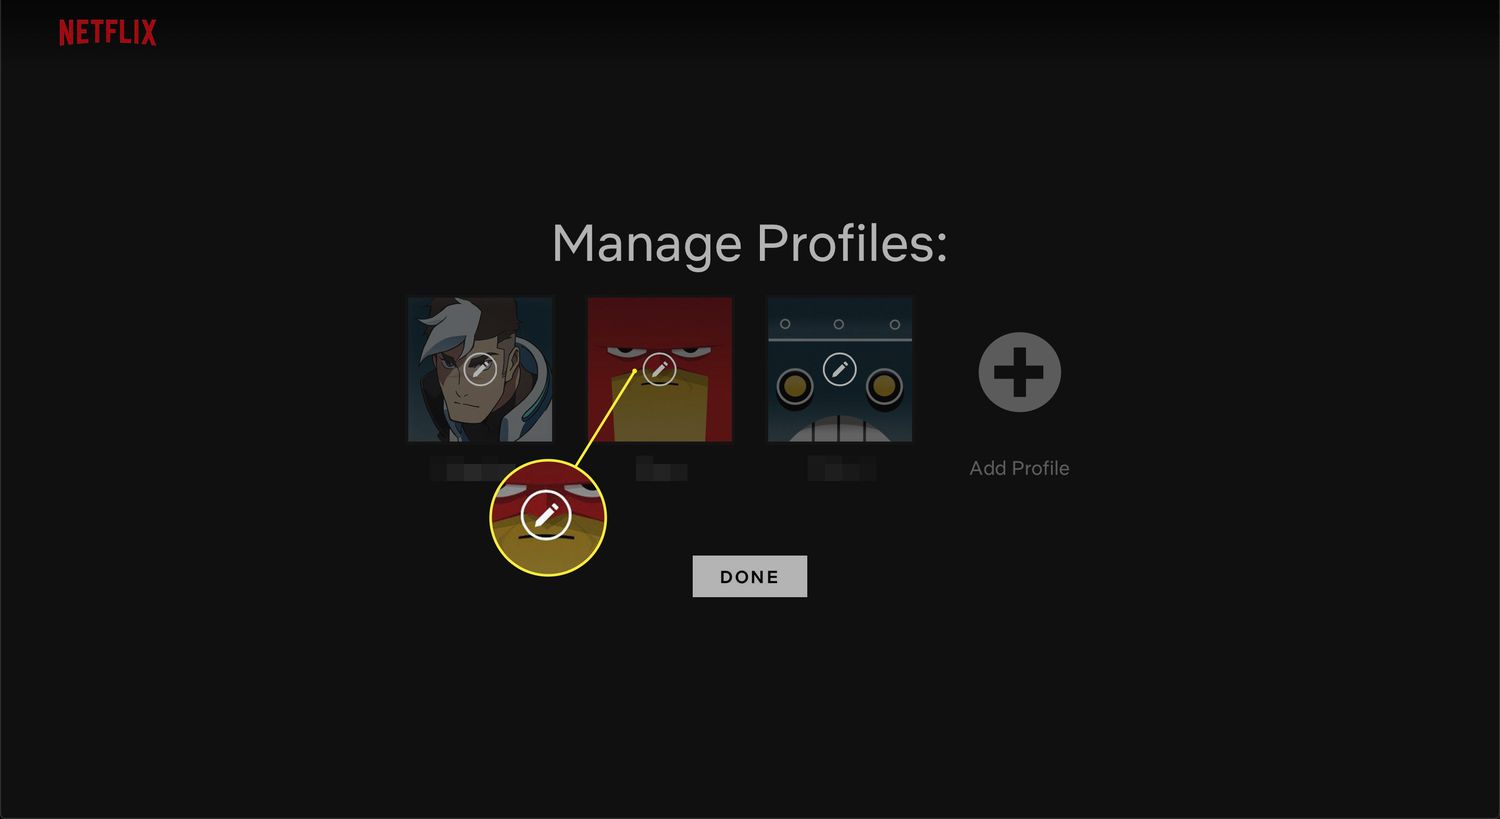 How Do You Delete A Profile On Netflix